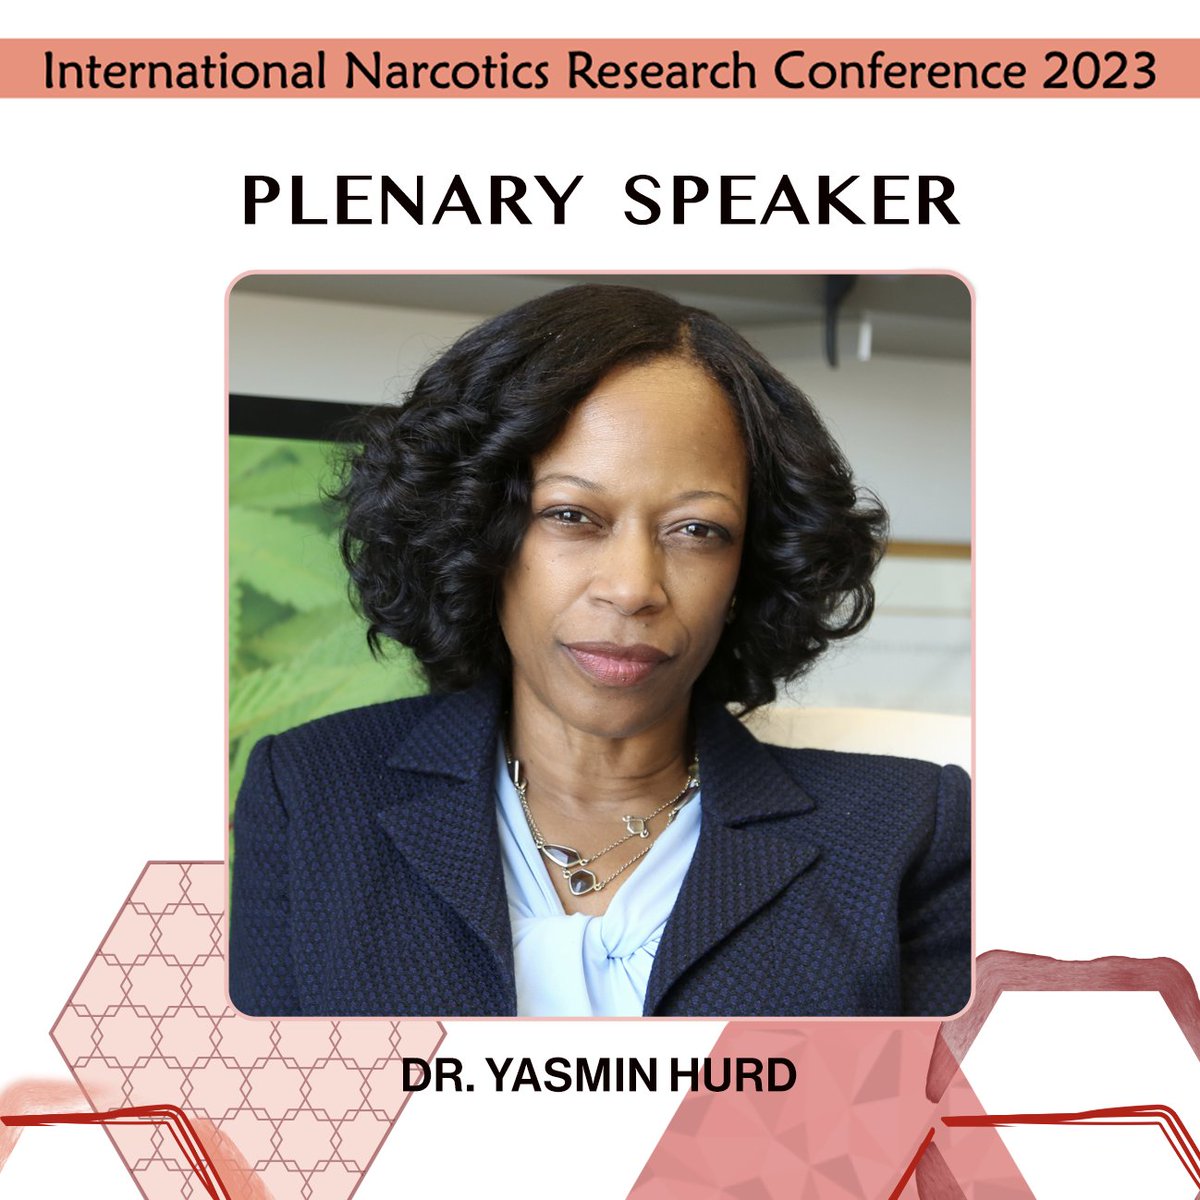 At @INRCmeeting? On TUESDAY, July 11th at 8:30am, Dr. Yasmin Hurd @HurdLab presents her Plenary Lecture 'Translating #Opioid Abuse Guides New Targets for Therapeutic Interventions'. MARK YOUR CALENDAR 🗓️ SET YOUR ⏰💫NOT TO MISS! inrc2023-atl.org/copy-of-program @neurovoice #INRC2023